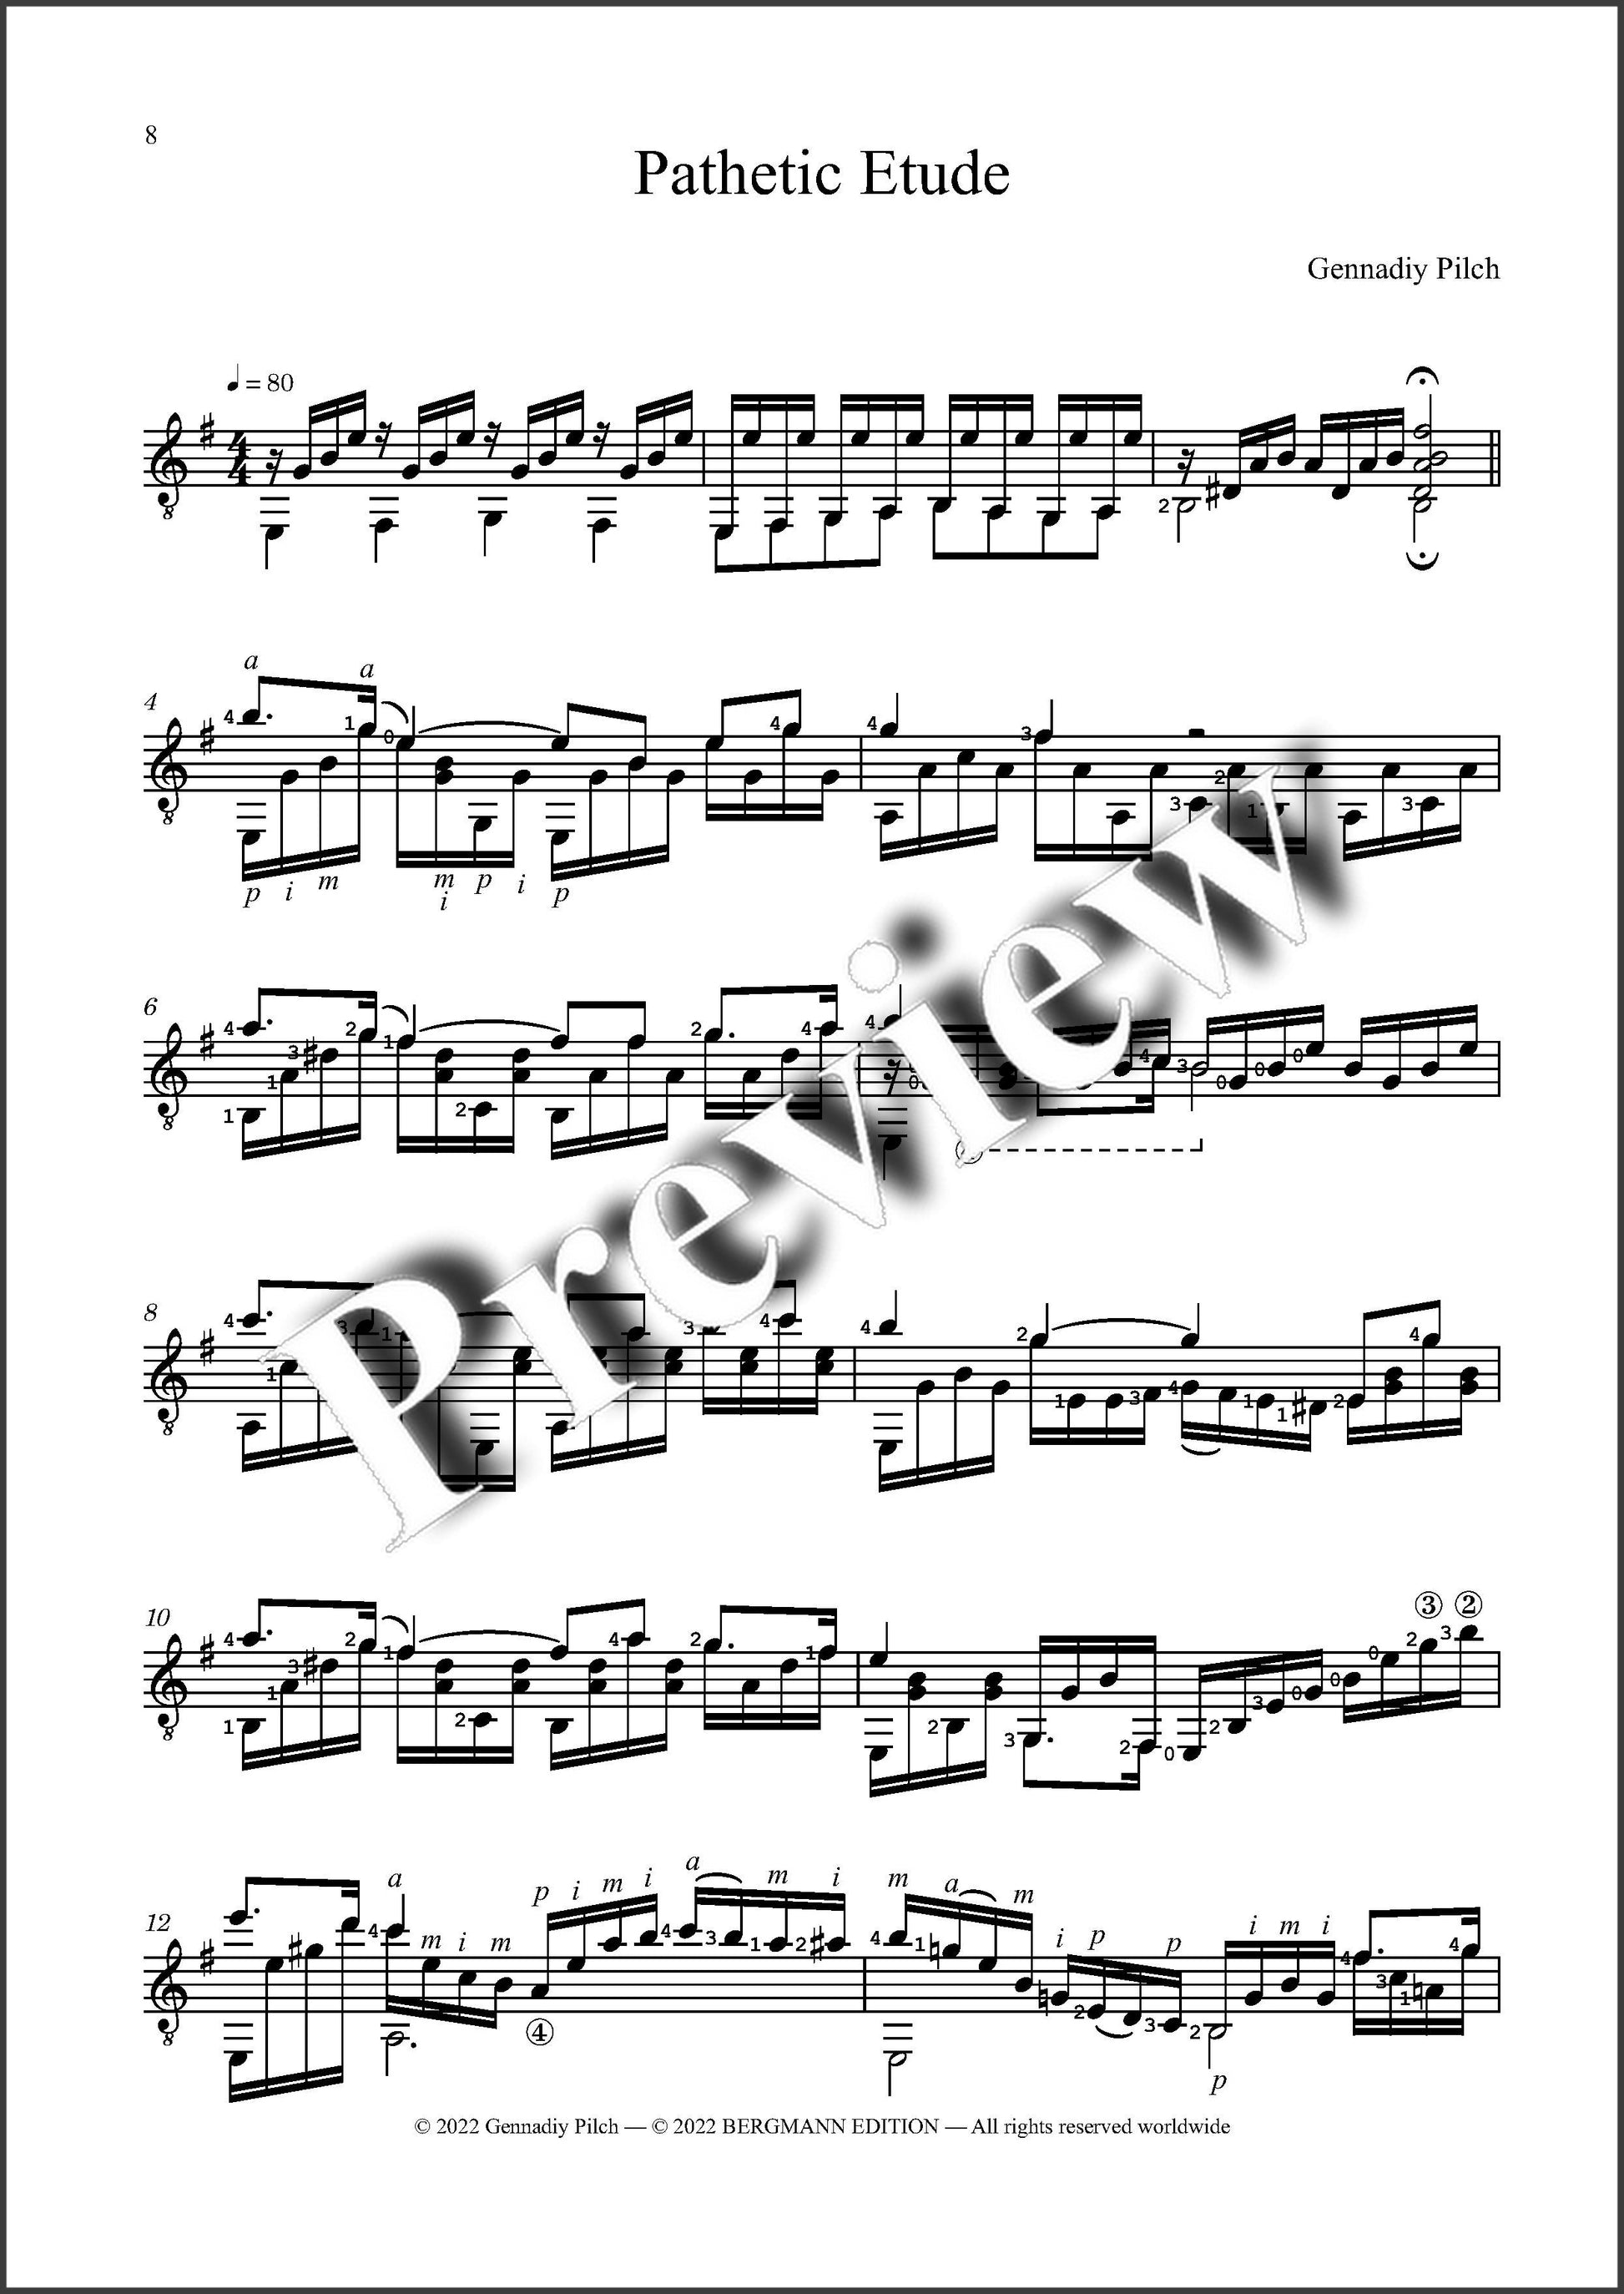 Gennadiy Pilch, Two Etudes - preview of the music score 2